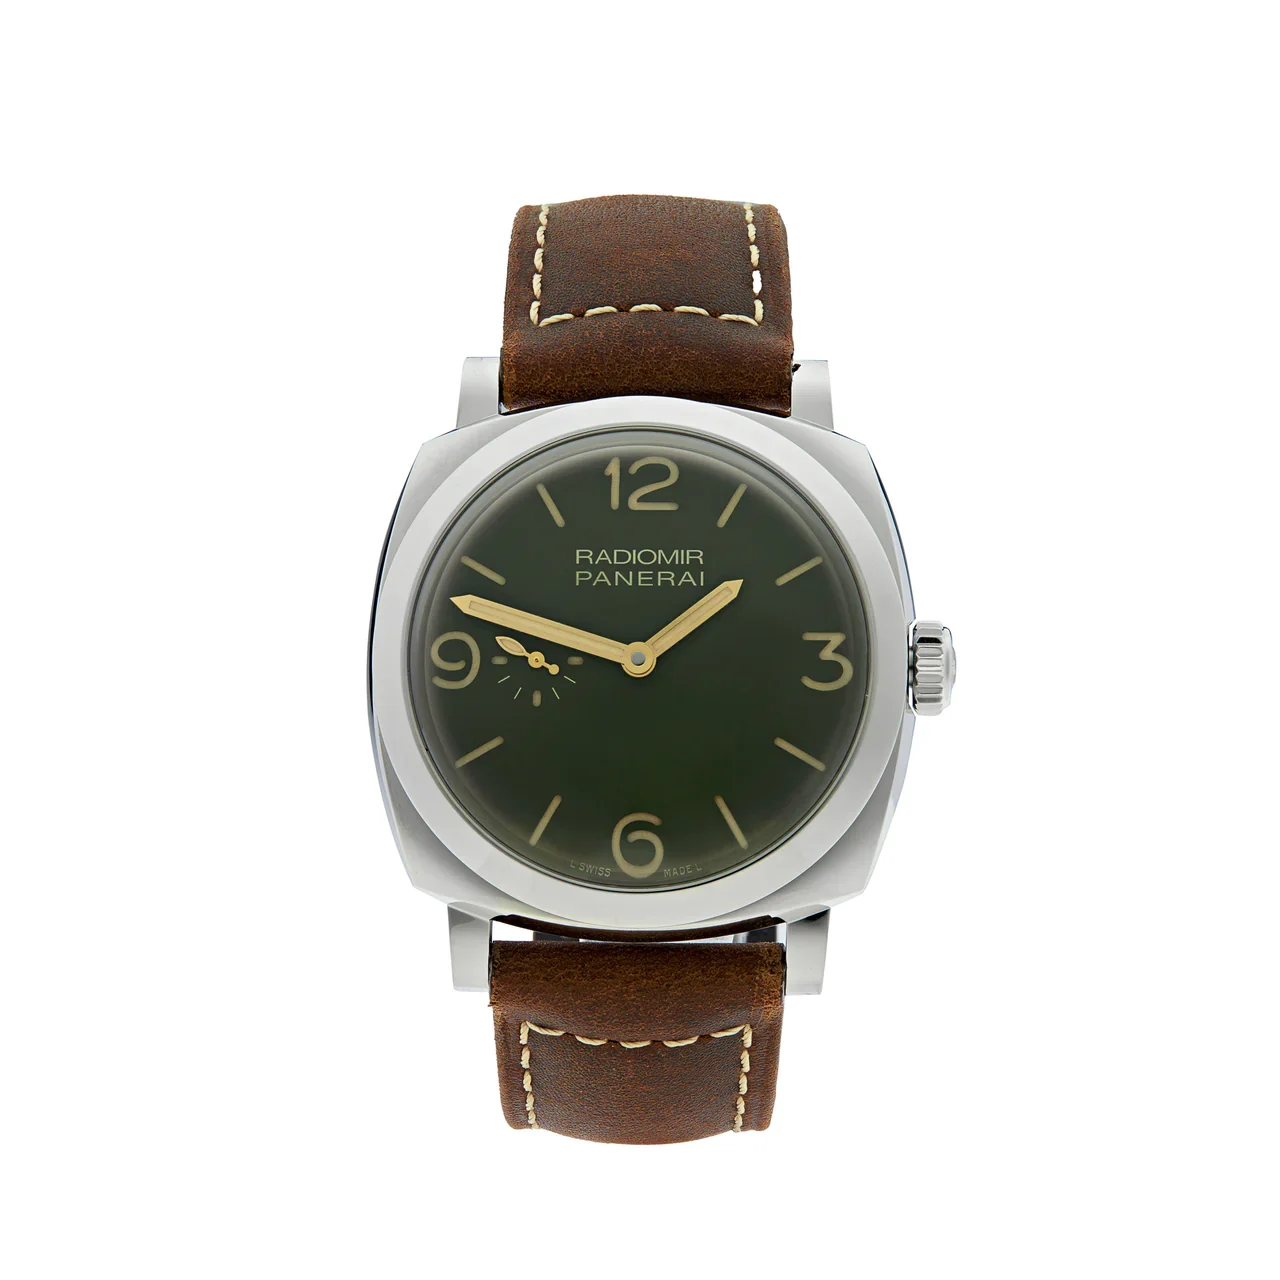 2018 Panerai Radiomir 1940 45 3 Days Automatic Stainless Steel / Military Green PAM00995 Listing Image 1